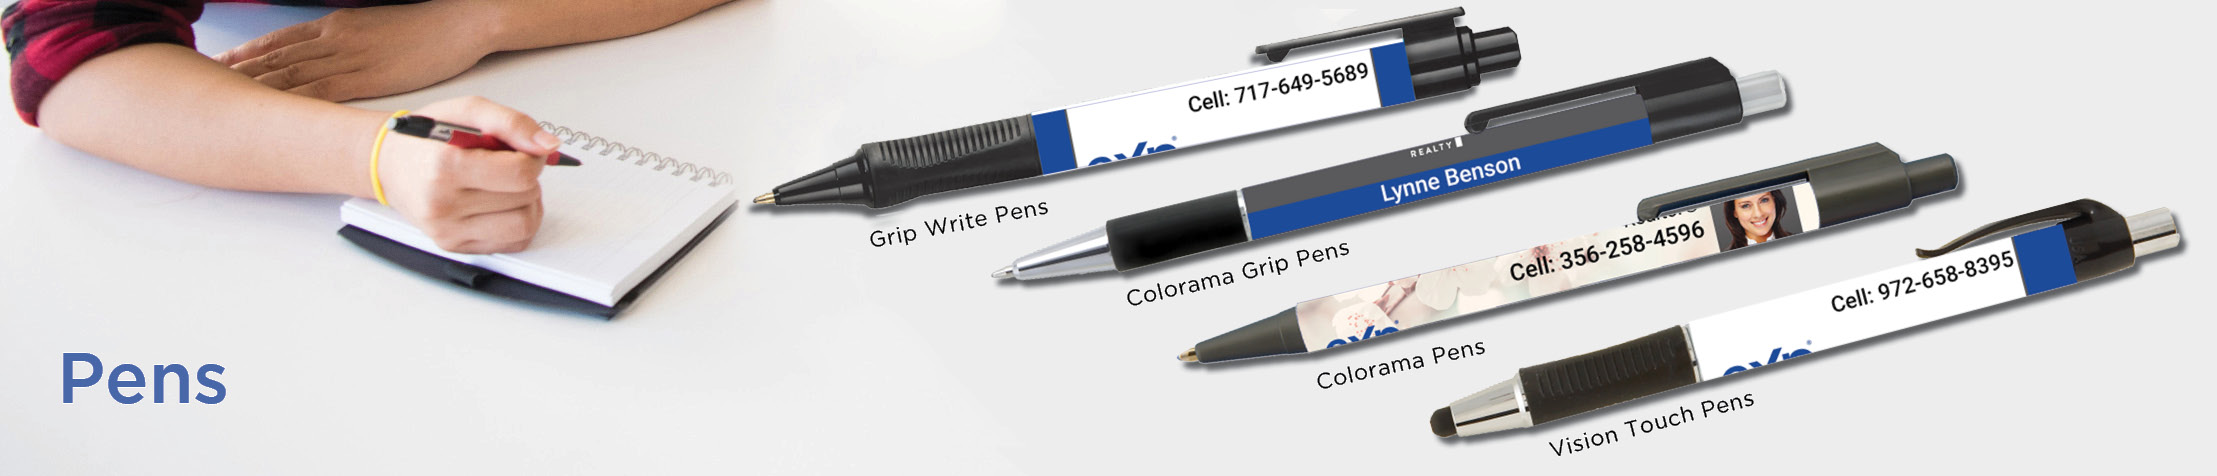 Real Estate Personalized Pens - promotional products: Grip Write Pens, Colorama Pens, Vision Touch Pens, and Colorama Grip Pens | BestPrintBuy.com